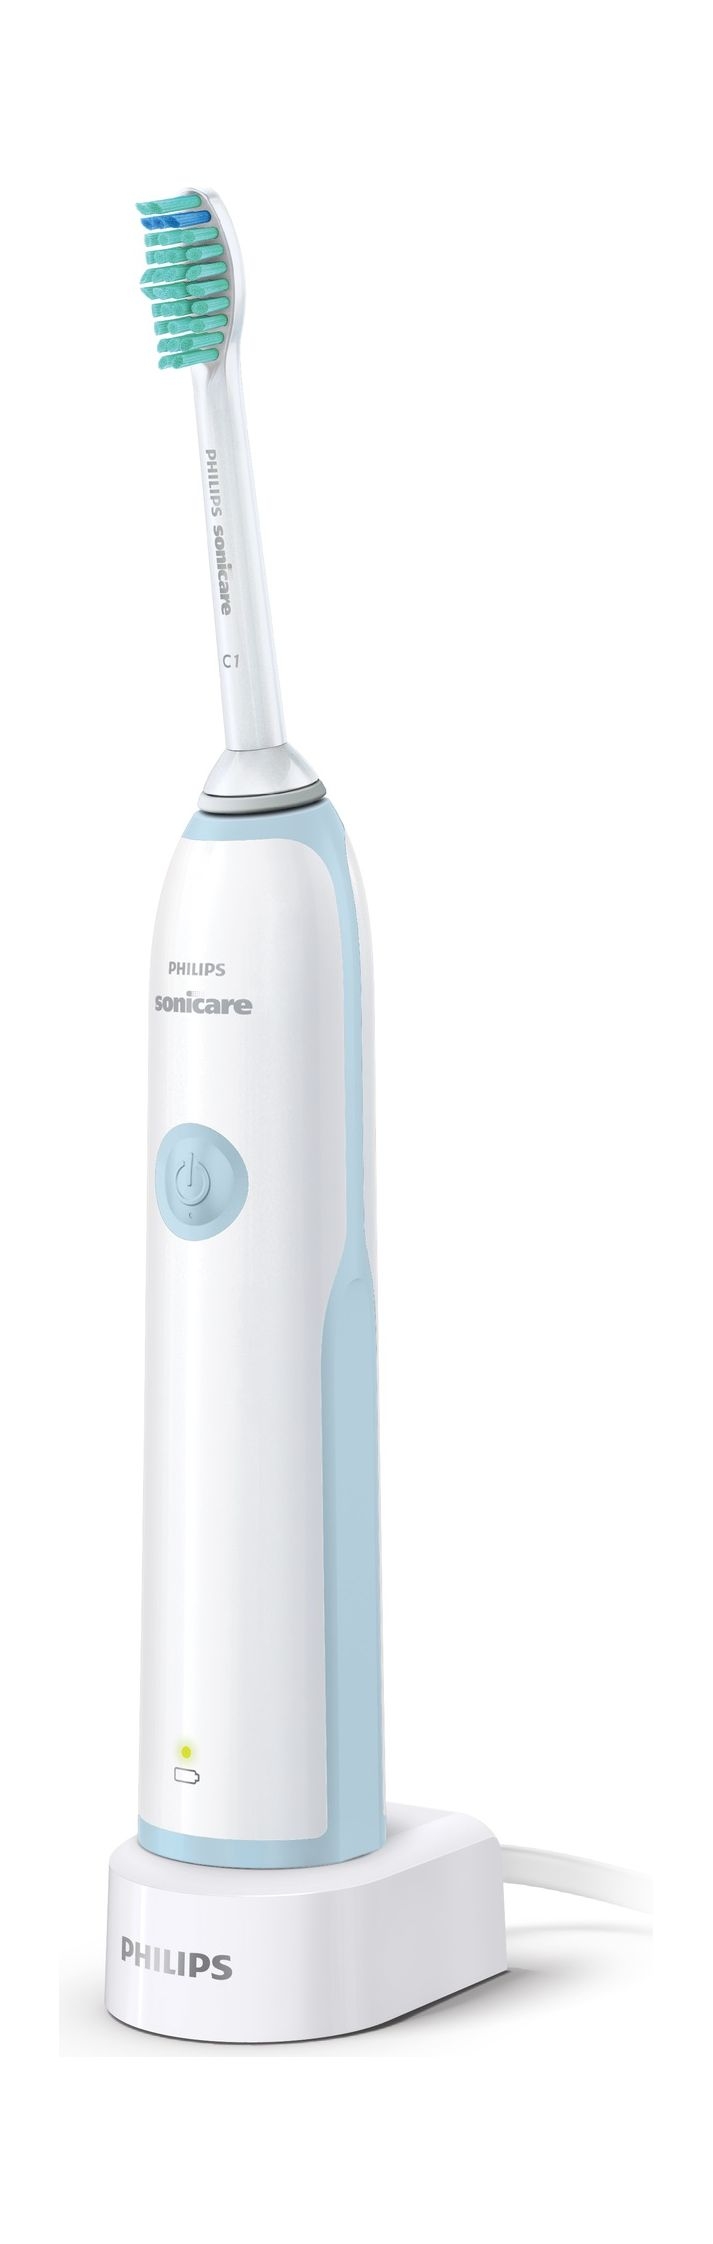 Buy Philips sonicare cleancare sonic electric toothbrush (hx5350/02) – white in Saudi Arabia